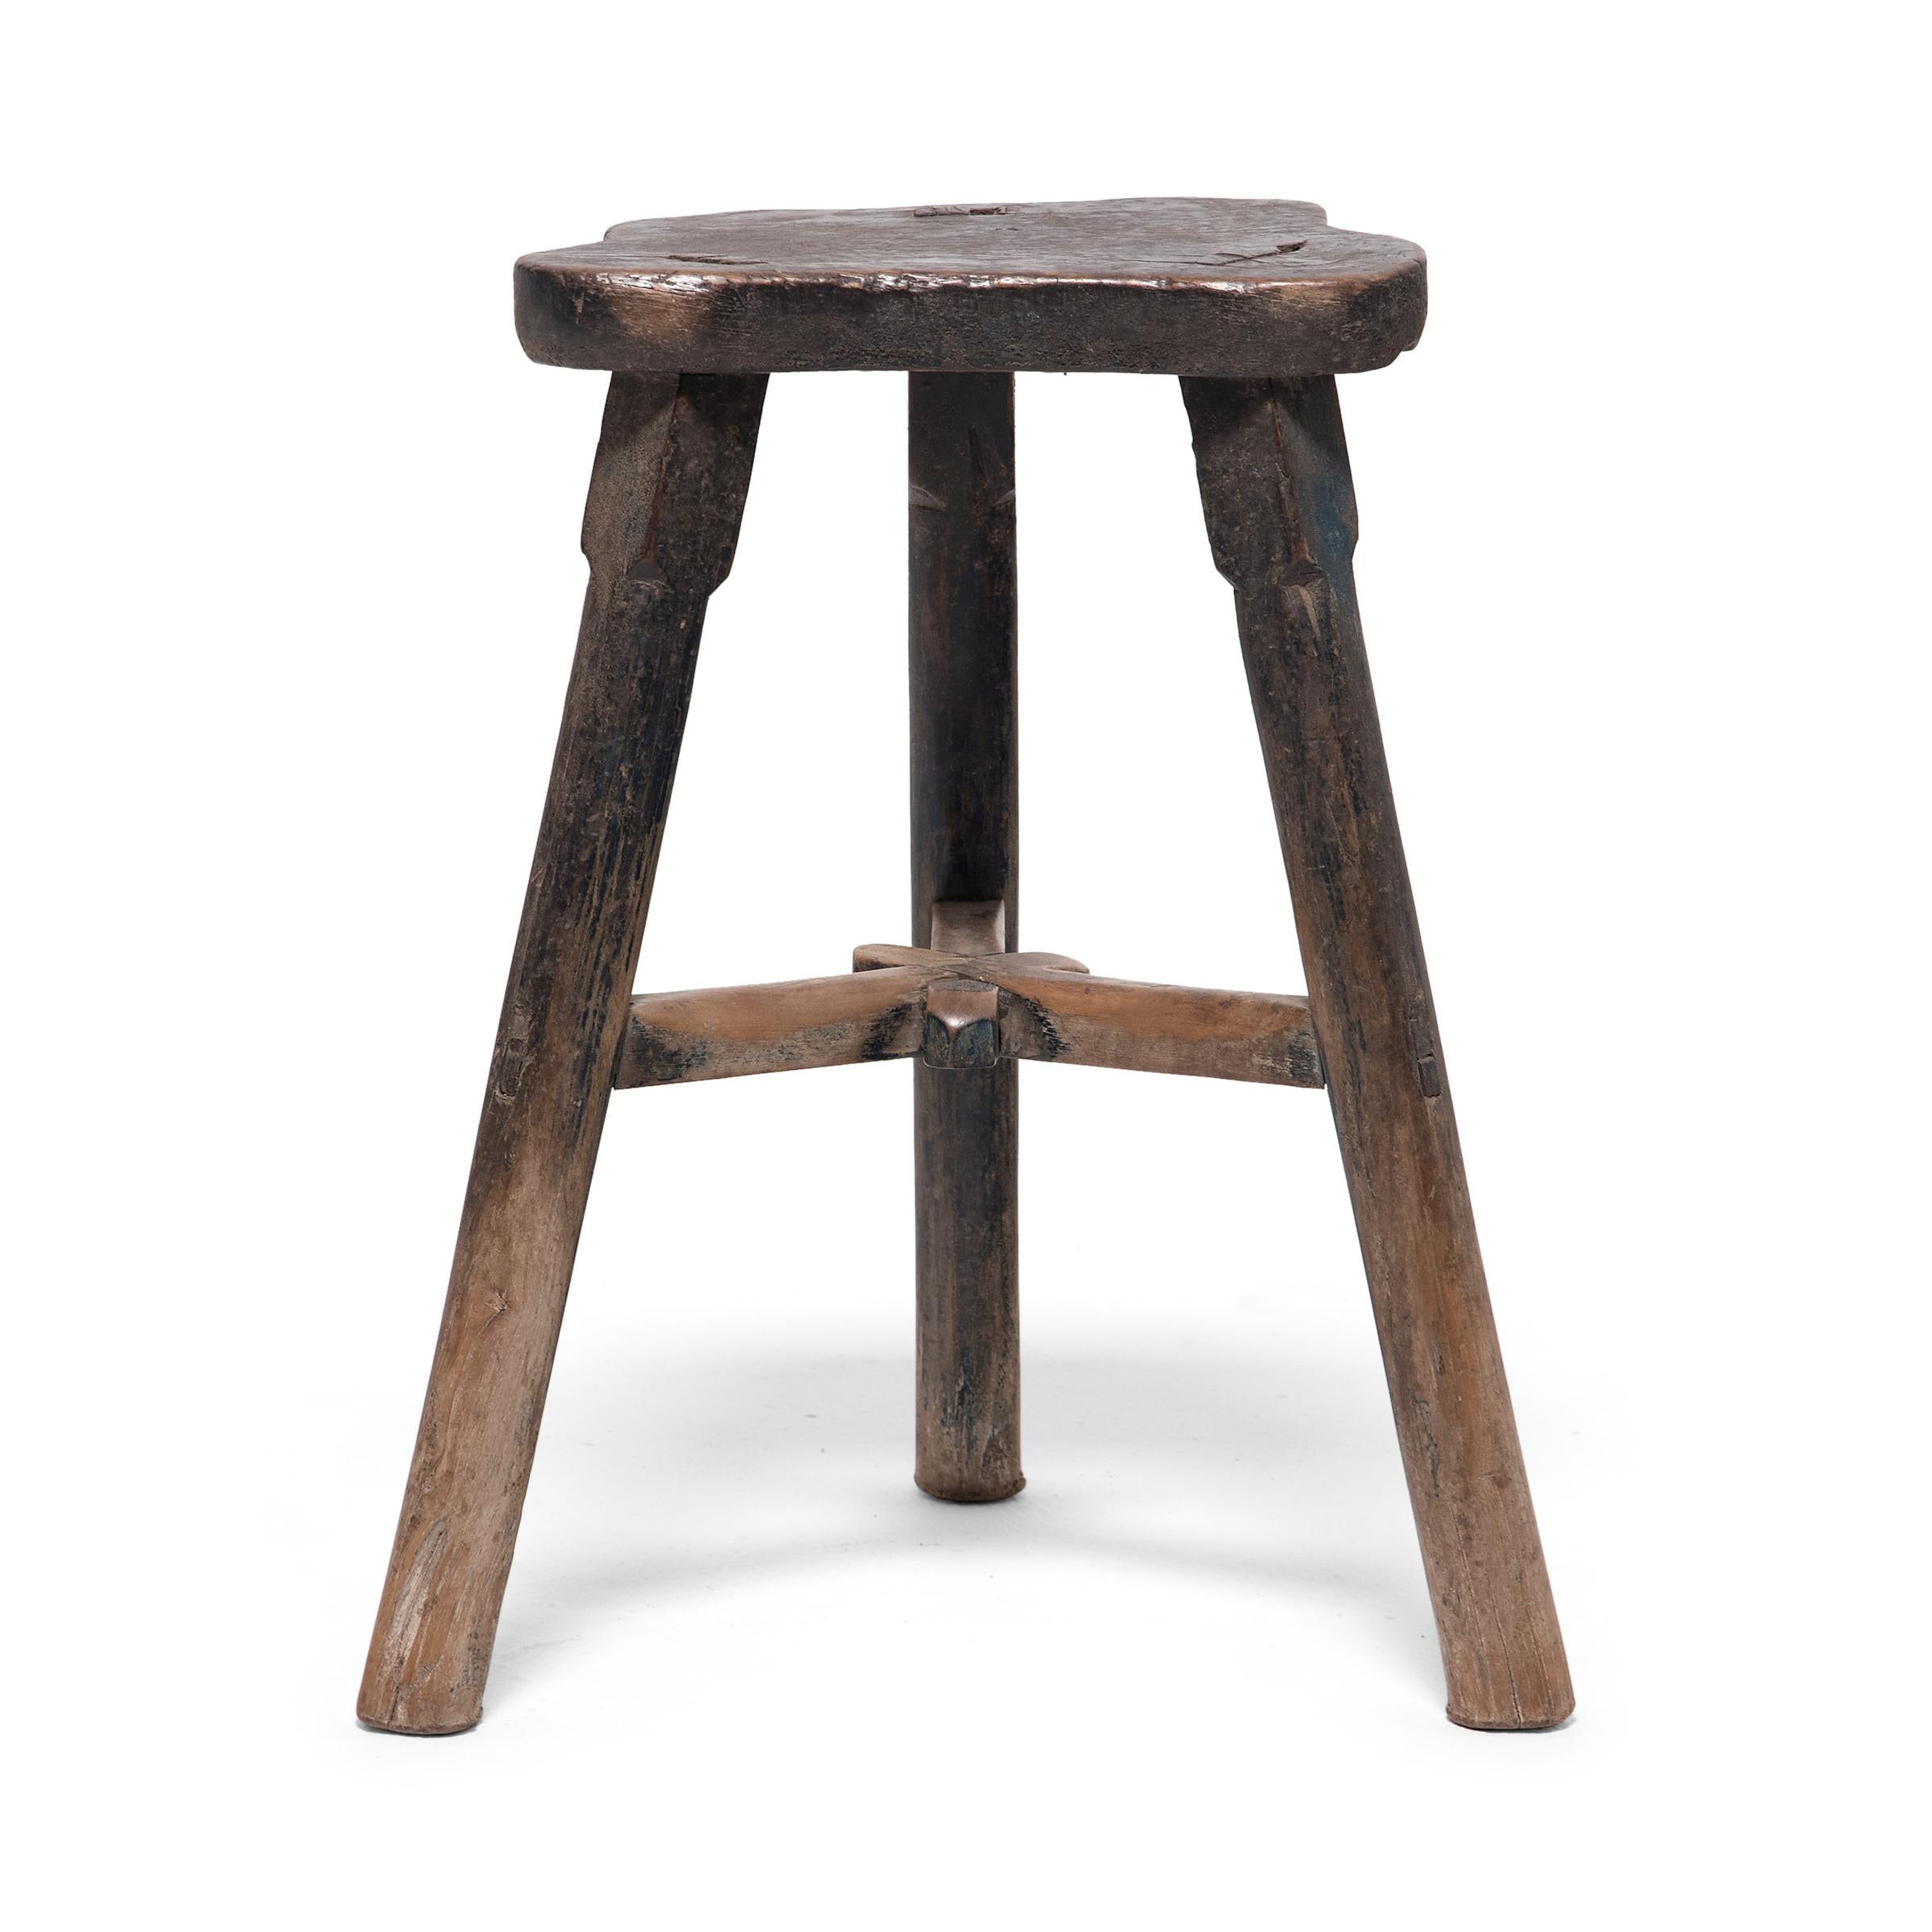 Constructed using mortise-and-tenon joinery, this early 20th century everyday stool from China's Hebei province has a relaxed presence and balanced form. Three round legs support a flat seat that has been cut to the Silhouette of a butterfly, a